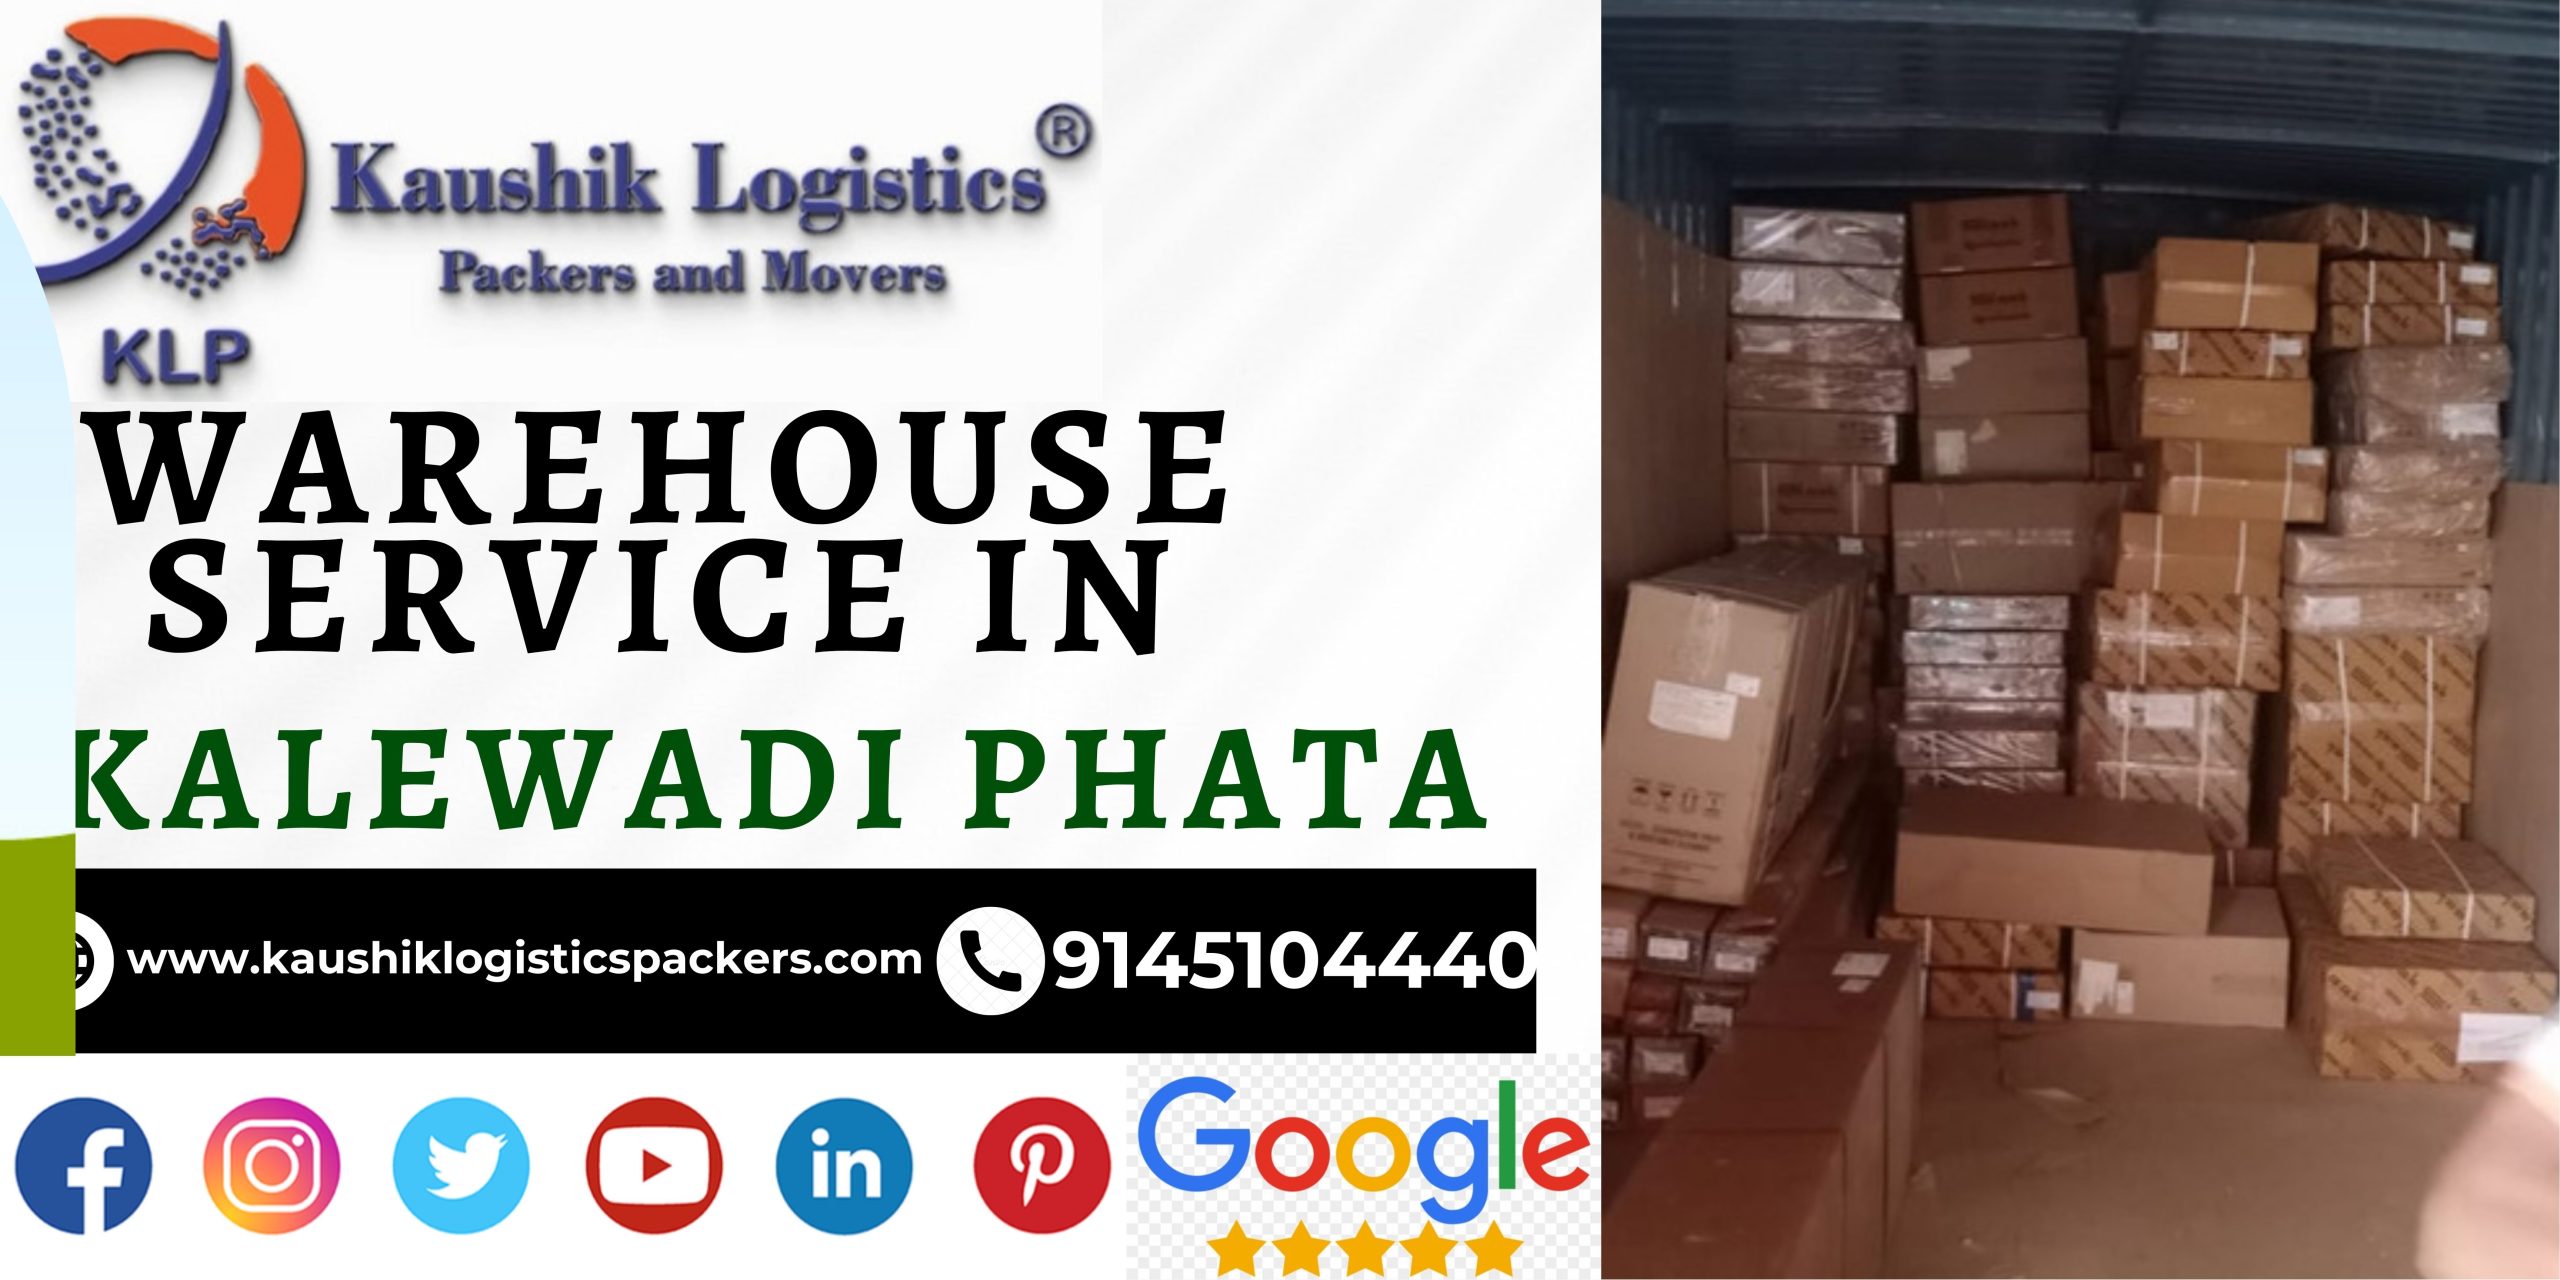 Packers and Movers In Kalewadi Phata